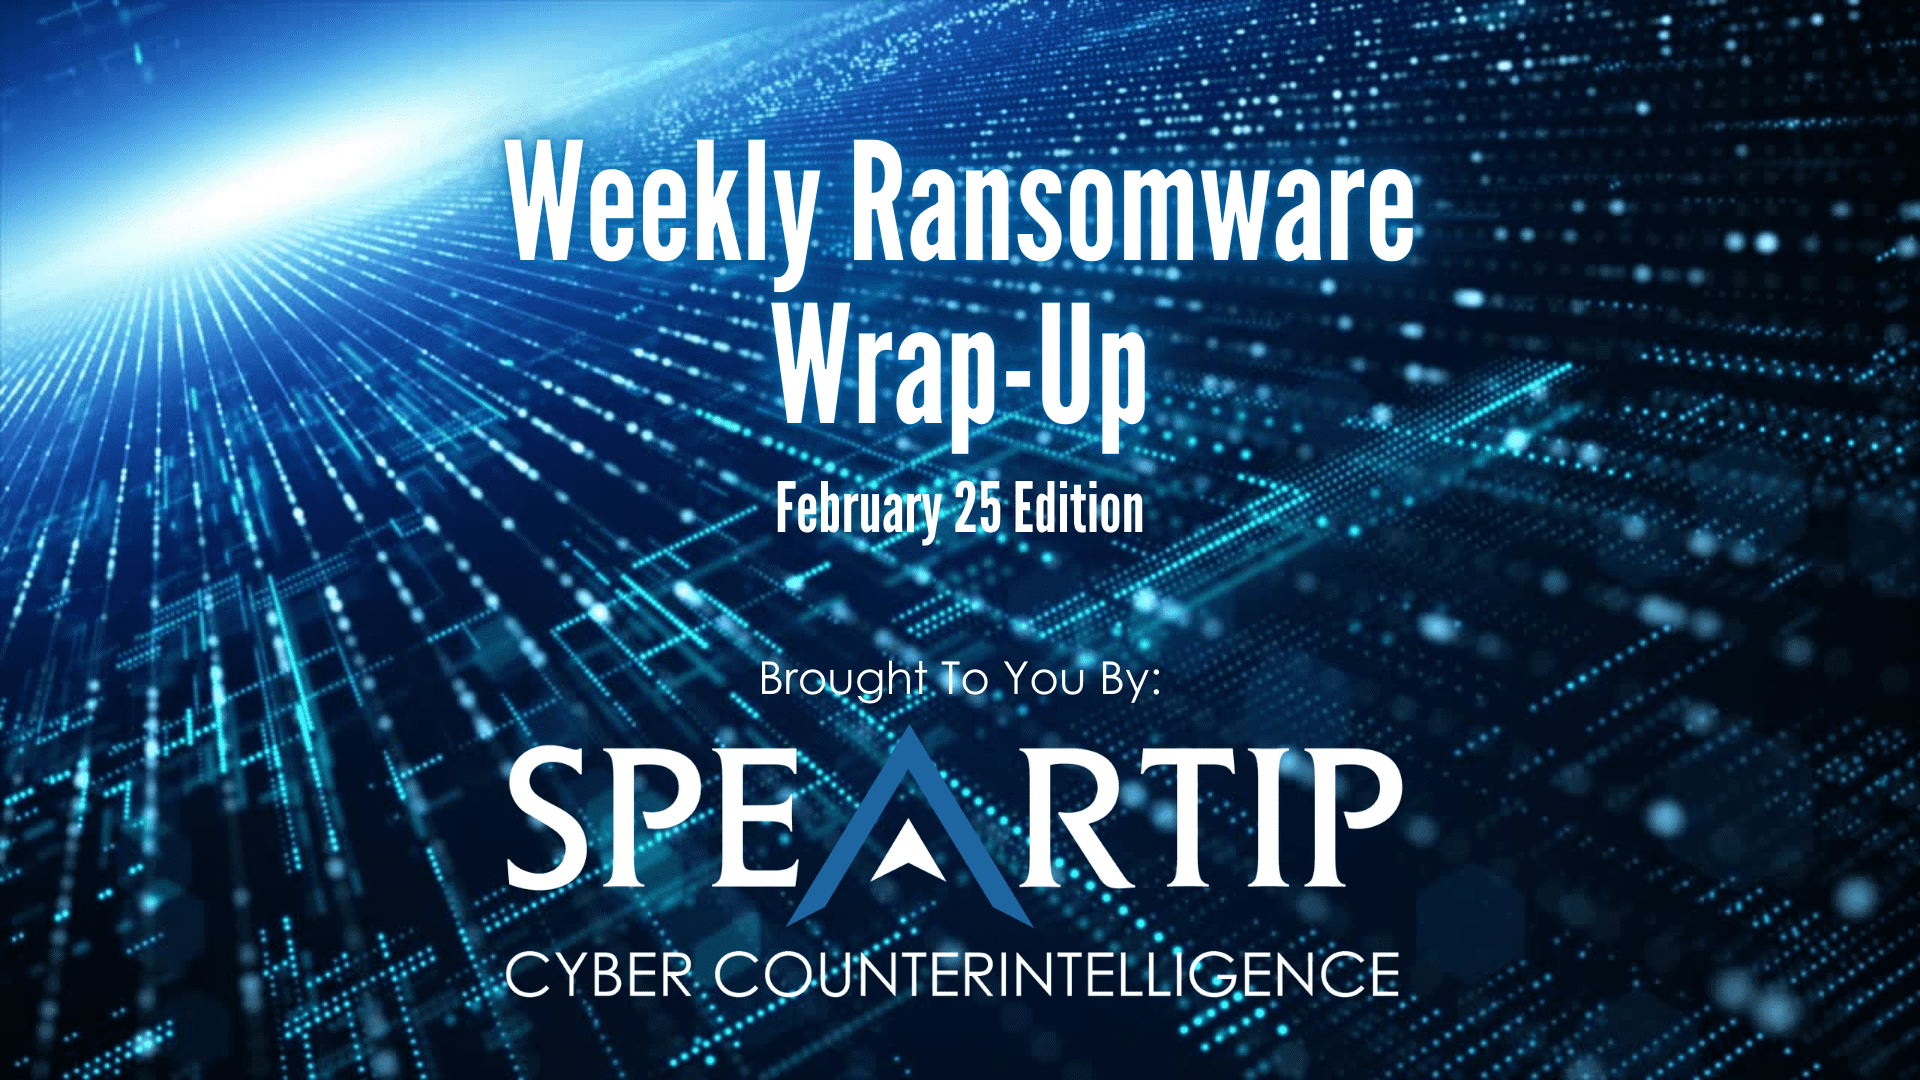 Feb 25_Weekly Ransomware Wrap-Up